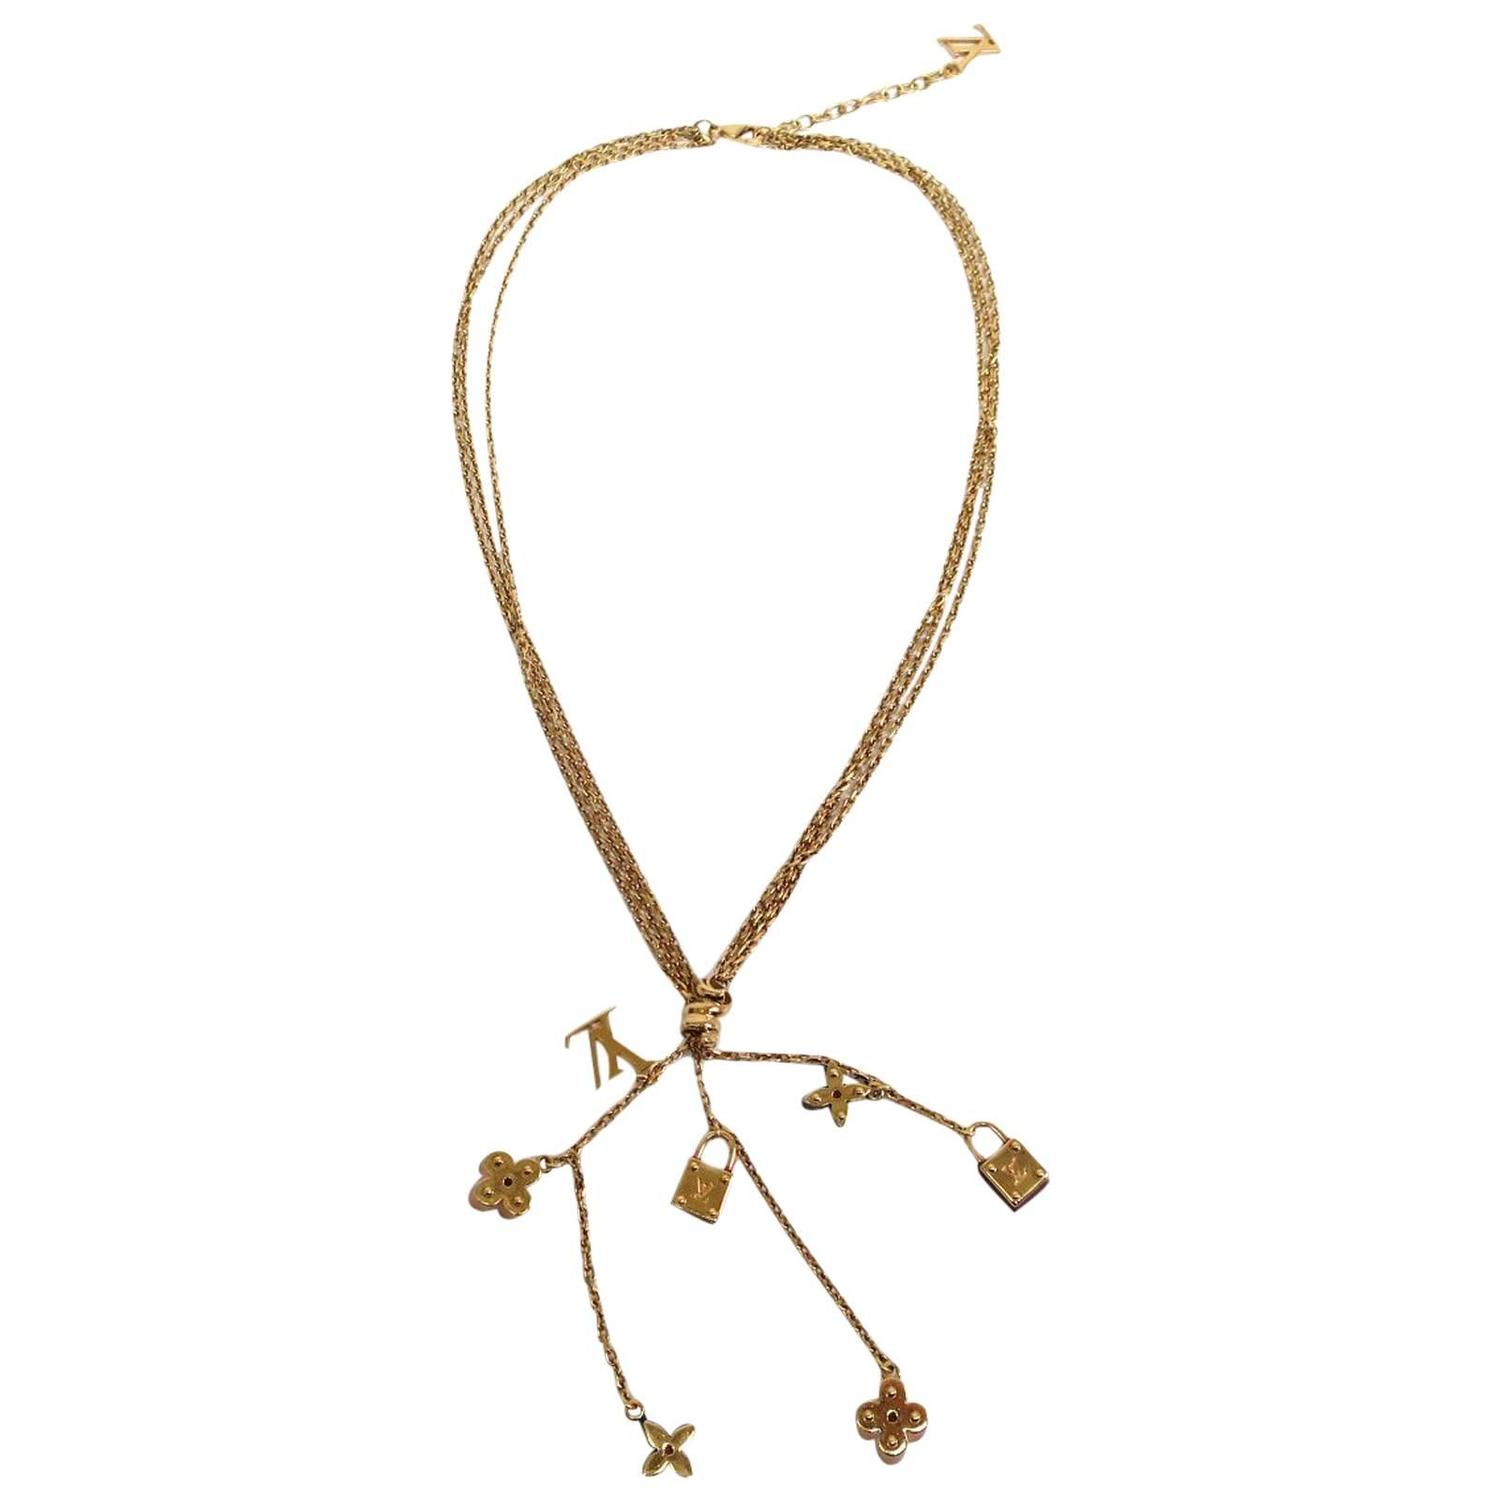 Louis Vuitton LIKE NEW Gold LV Flower Charms Chain Lariat Dangle Necklace in Box For Sale at 1stdibs